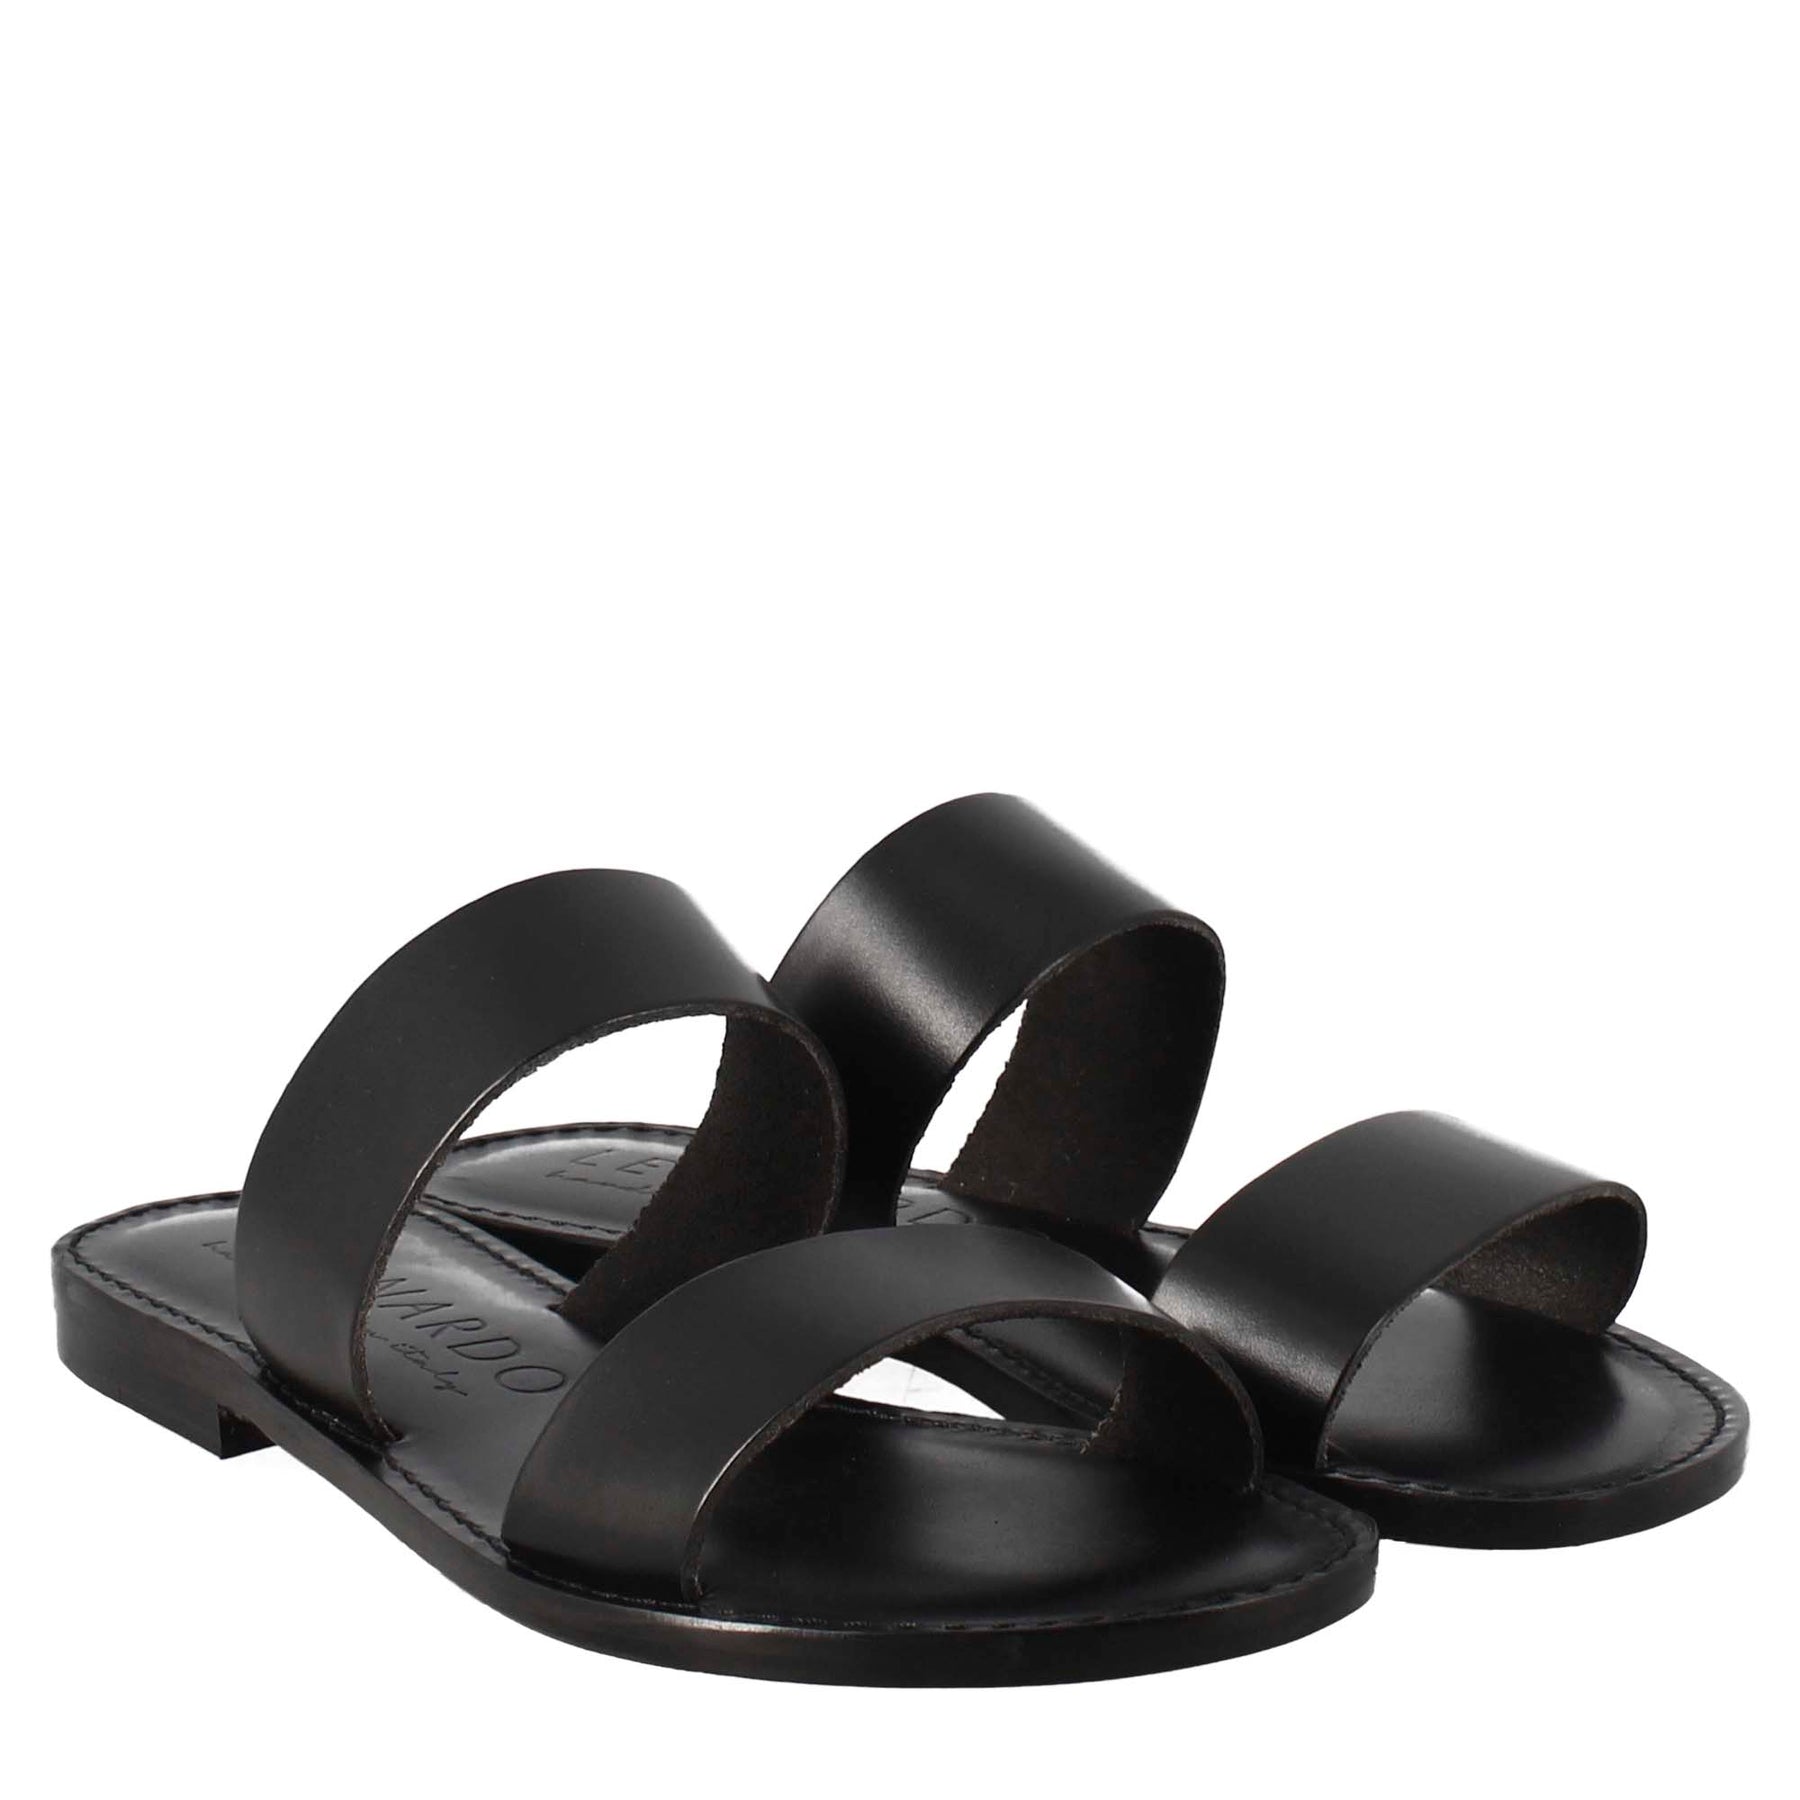 Nirvana women's sandals in ancient Roman style in black leather 